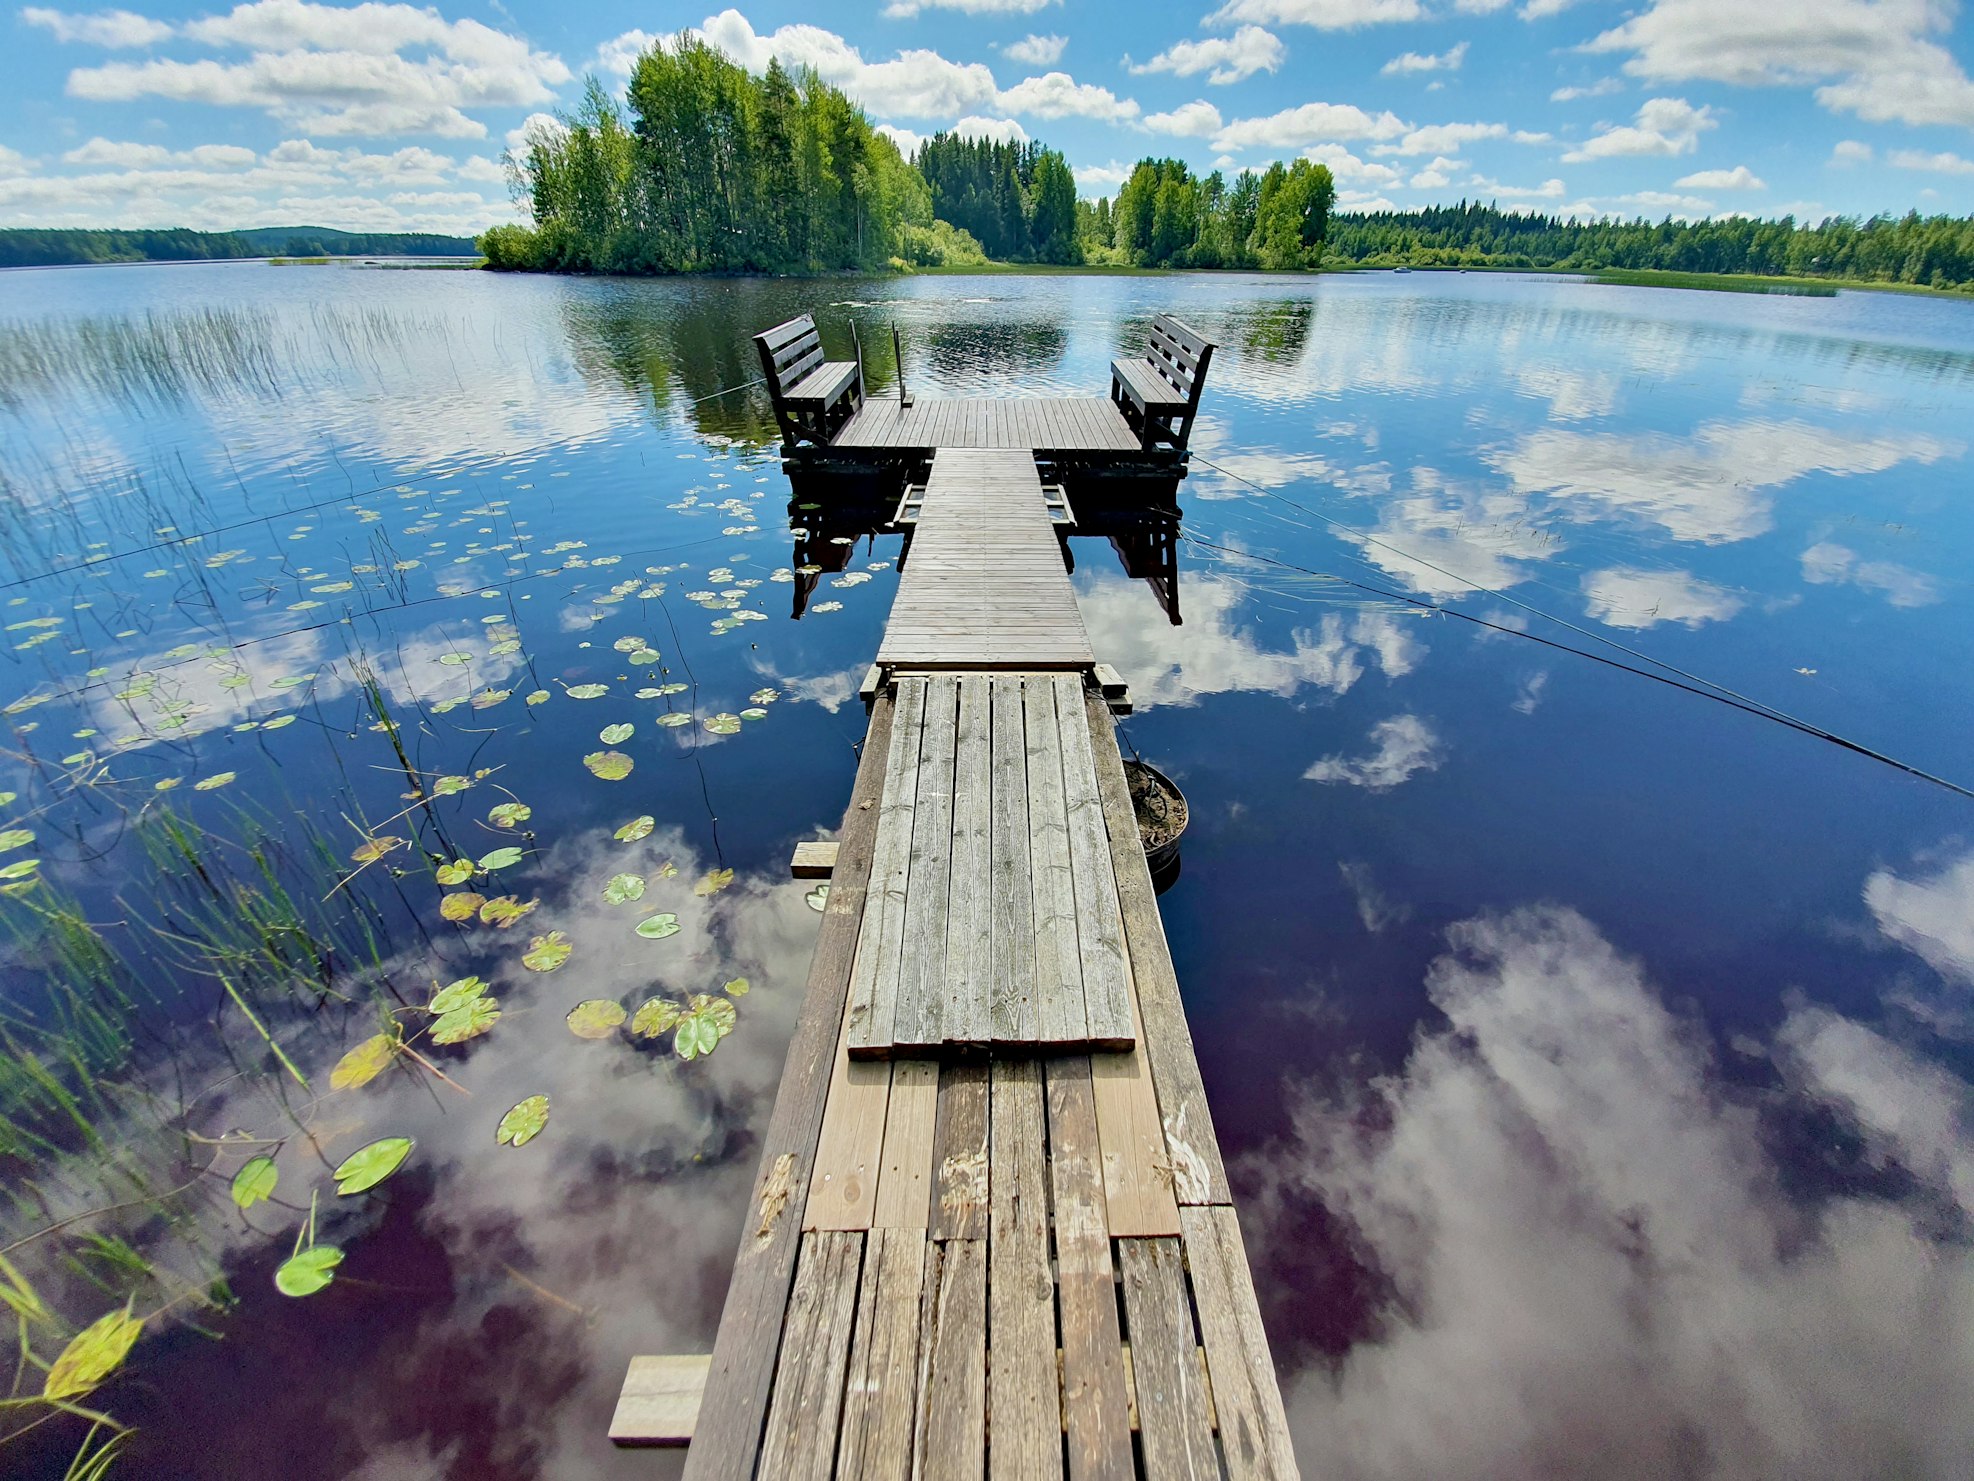 Waterfront in rural Finland